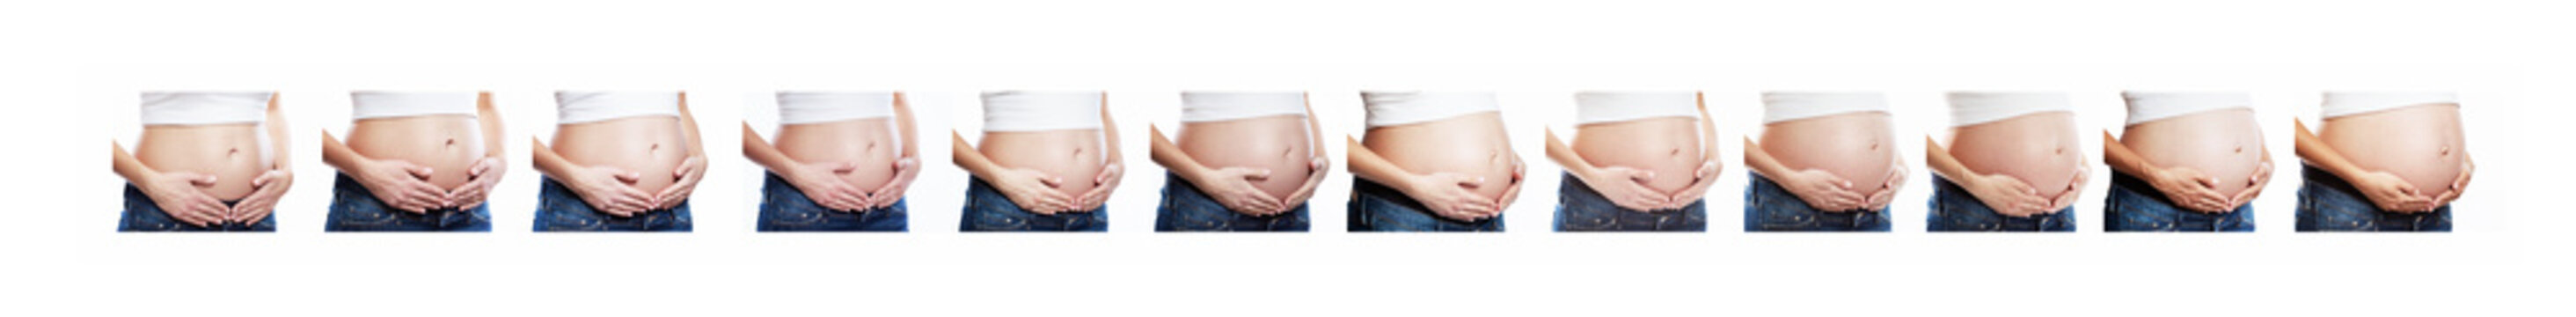 Growth of the abdomen of a pregnant woman, closeup. Set of photos of different terms. Collage. Isolated over white background. Panorama.